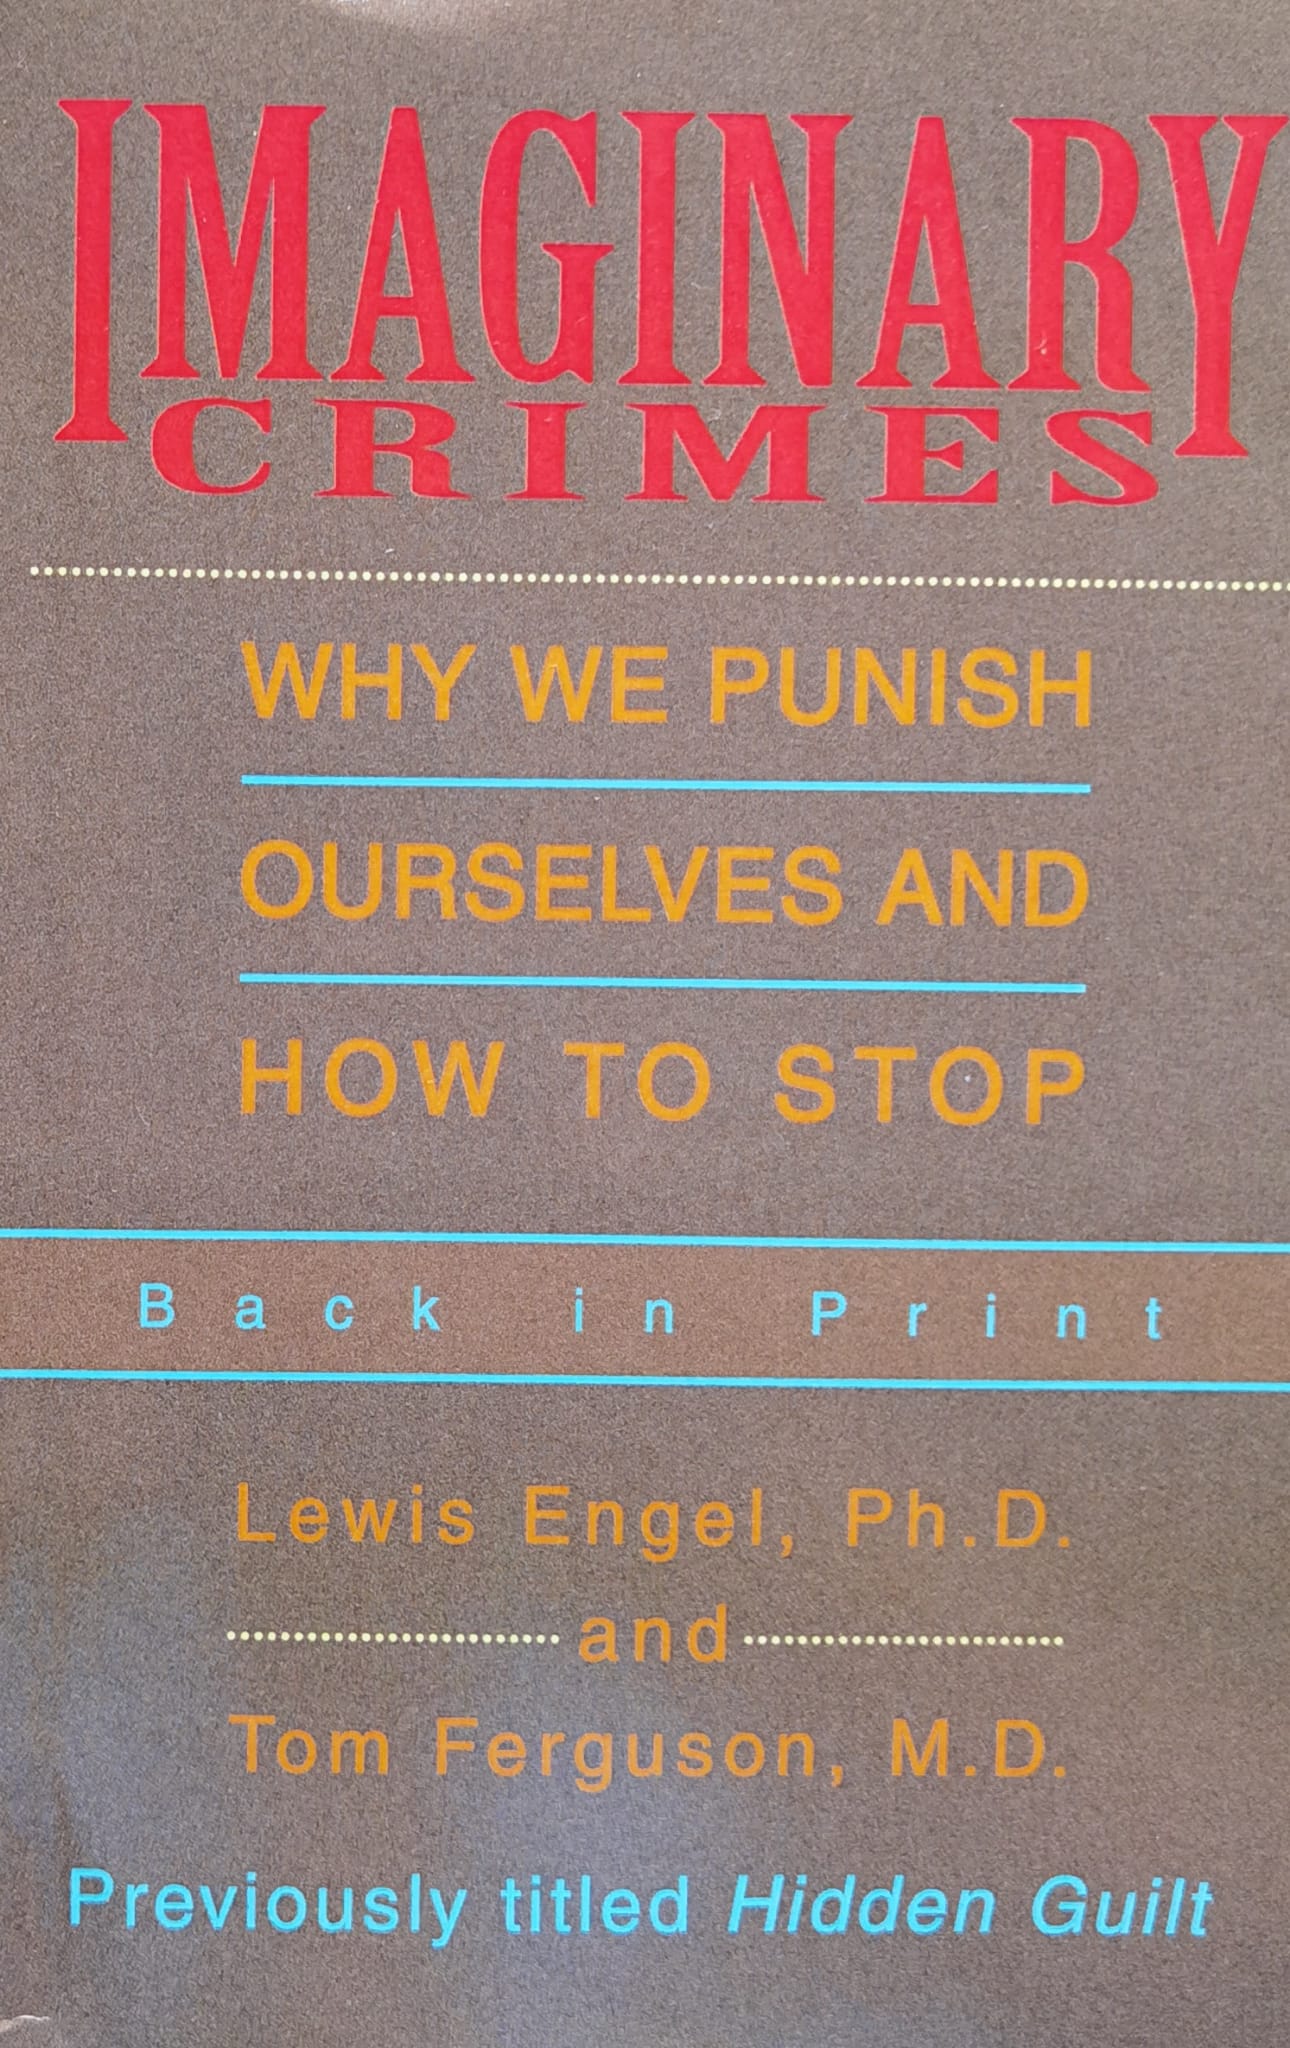 imaginary crimes , why we punish ourselves and how to stop                                           lewis engel and hidden guilt                                                                        